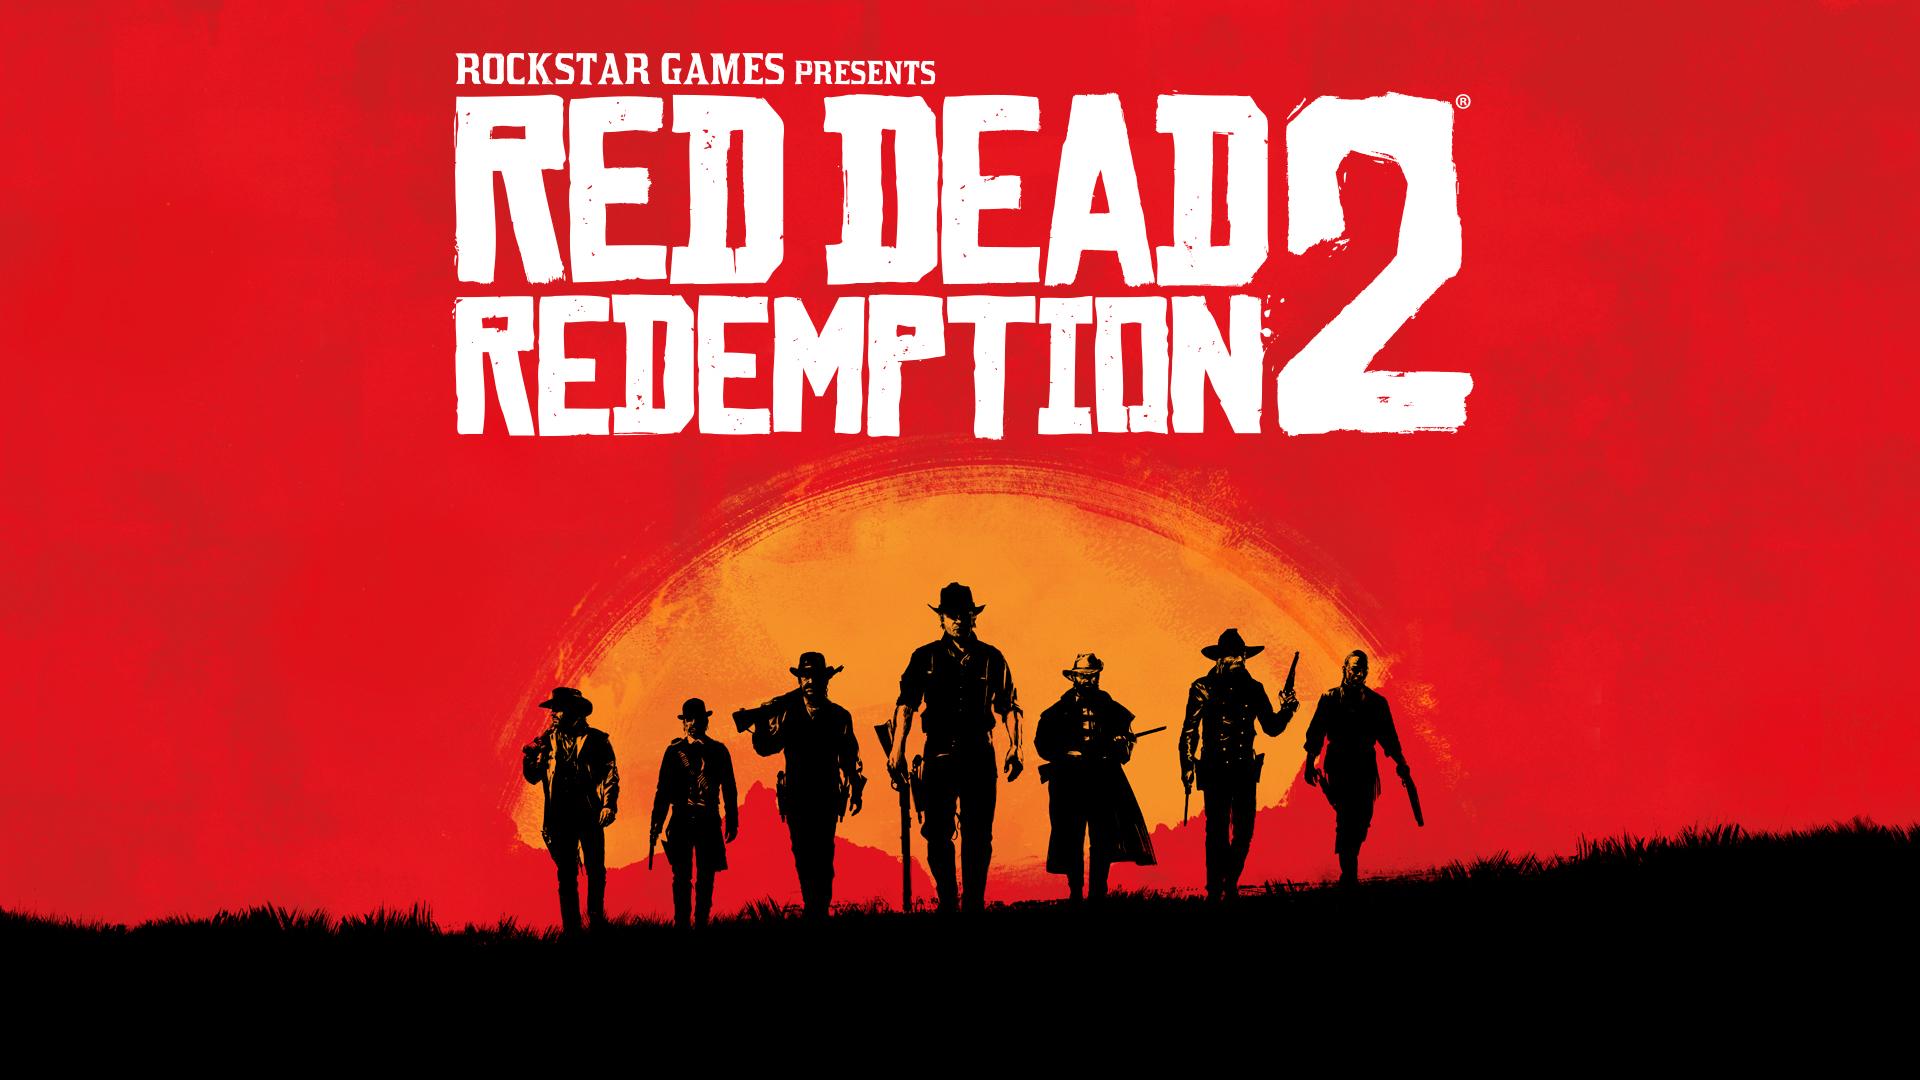 GameStop on Twitter: "Pre-order Red Dead at GameStop for or #XboxOne https://t.co/tTvd9gSAeh https://t.co/pC7AqDvCRf" / Twitter